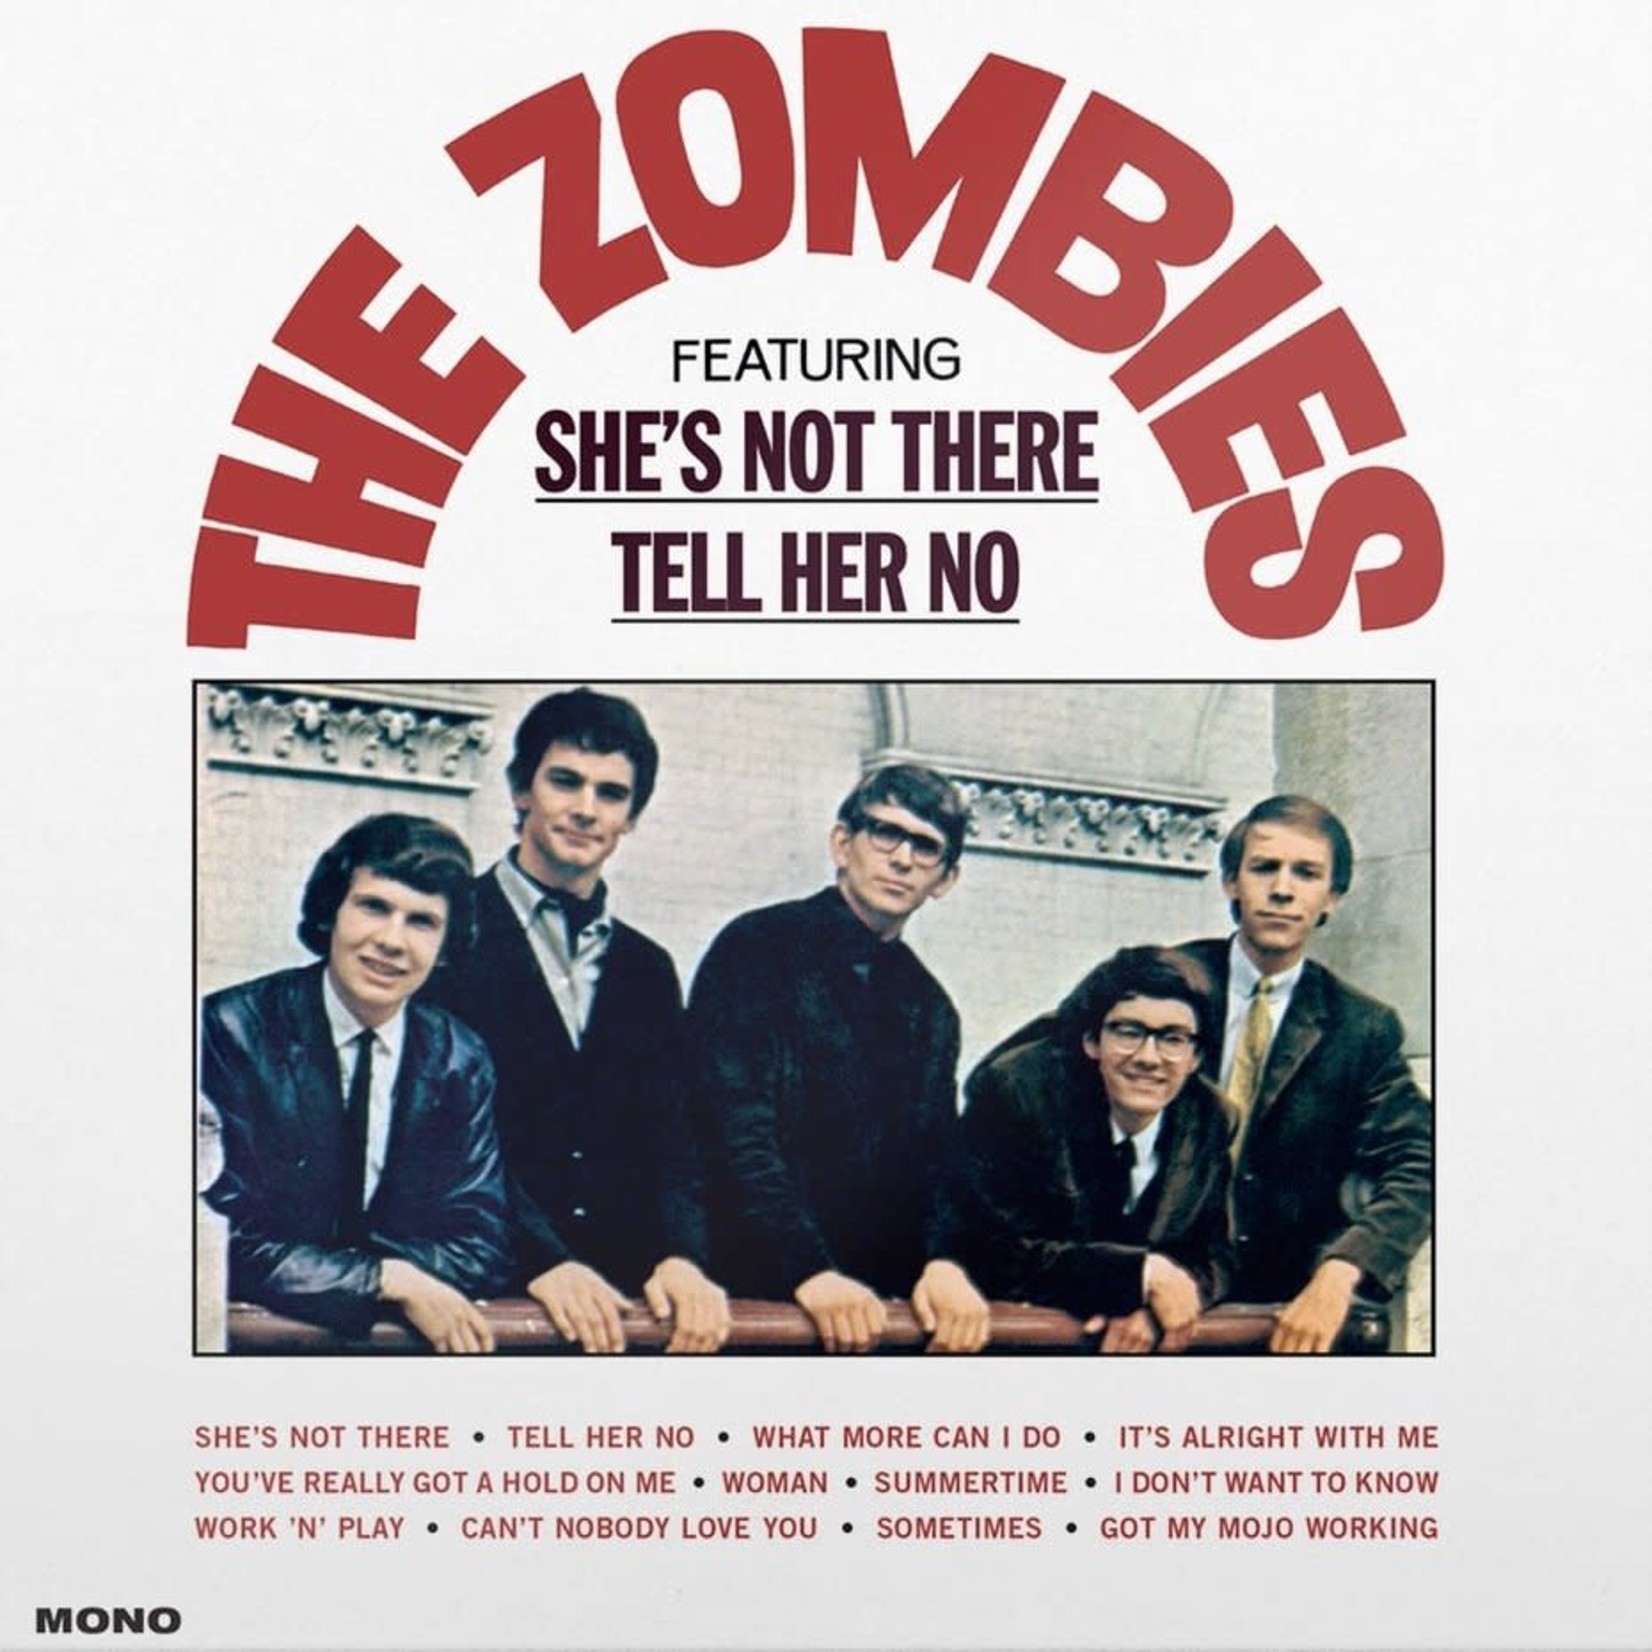 [New] Zombies - The Zombies